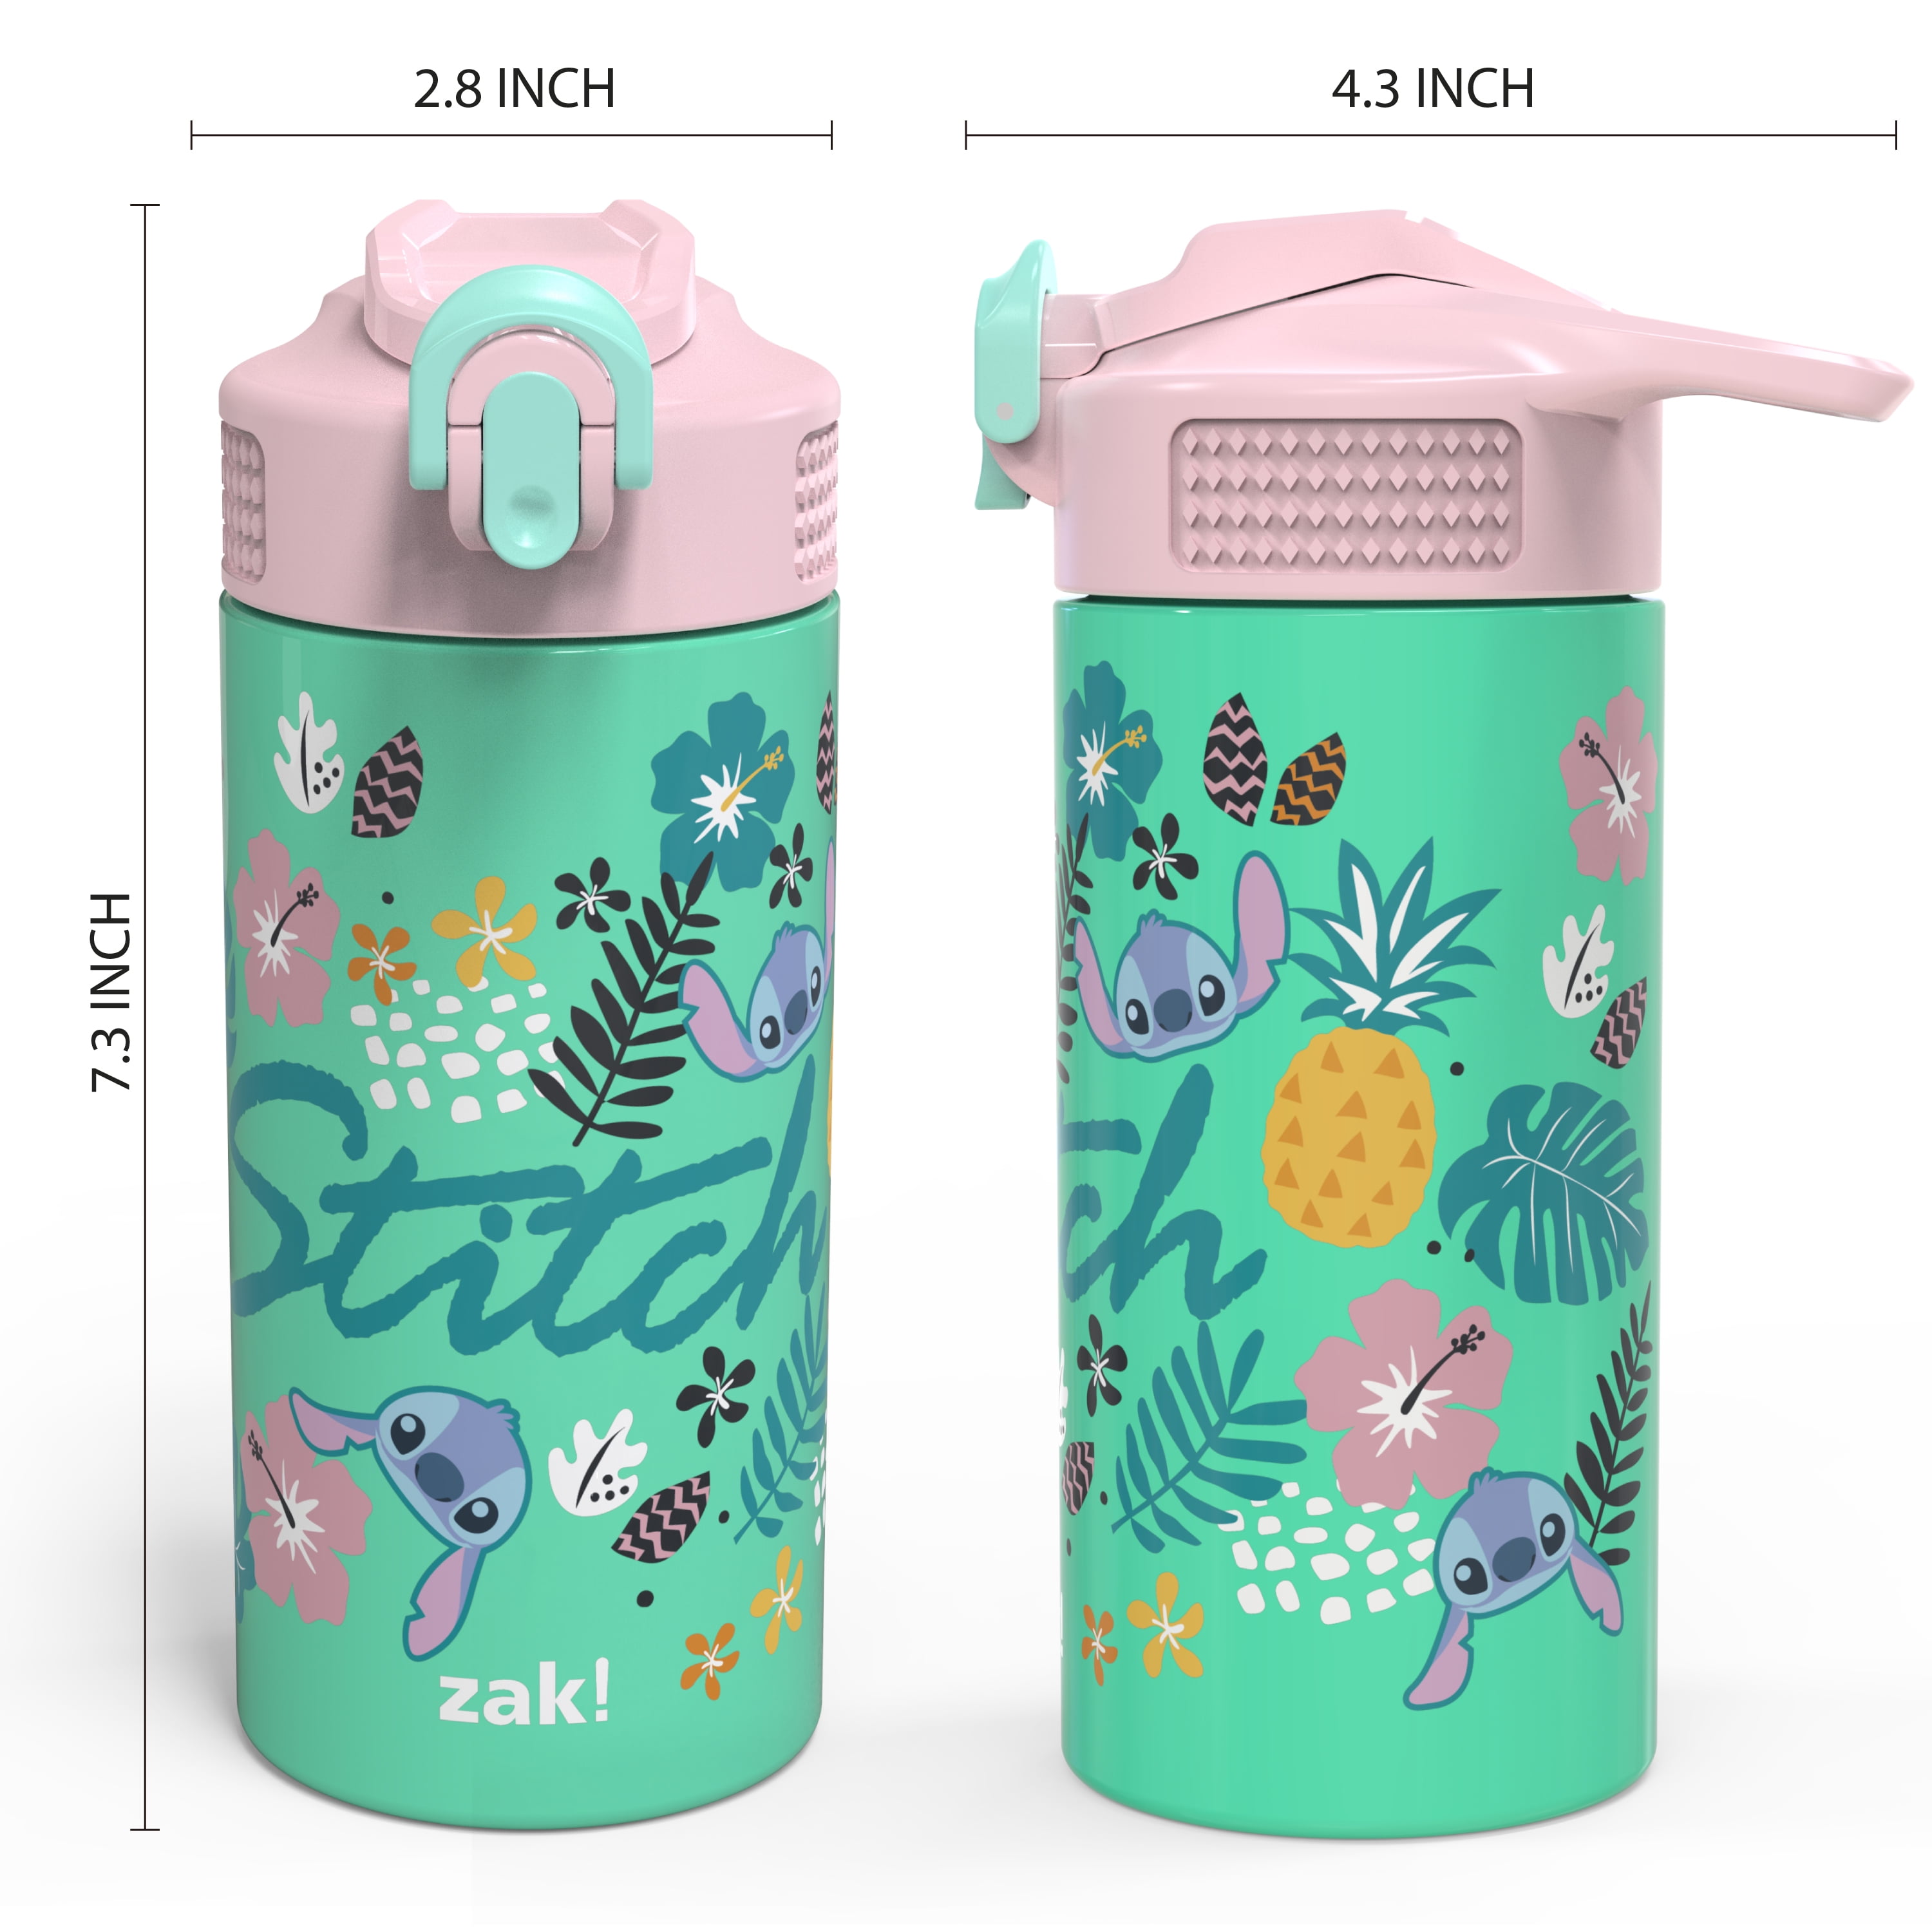 Zak Designs 14oz Recycled Stainless Steel Vacuum Insulated Kids' Water Bottle 'Disney Princess